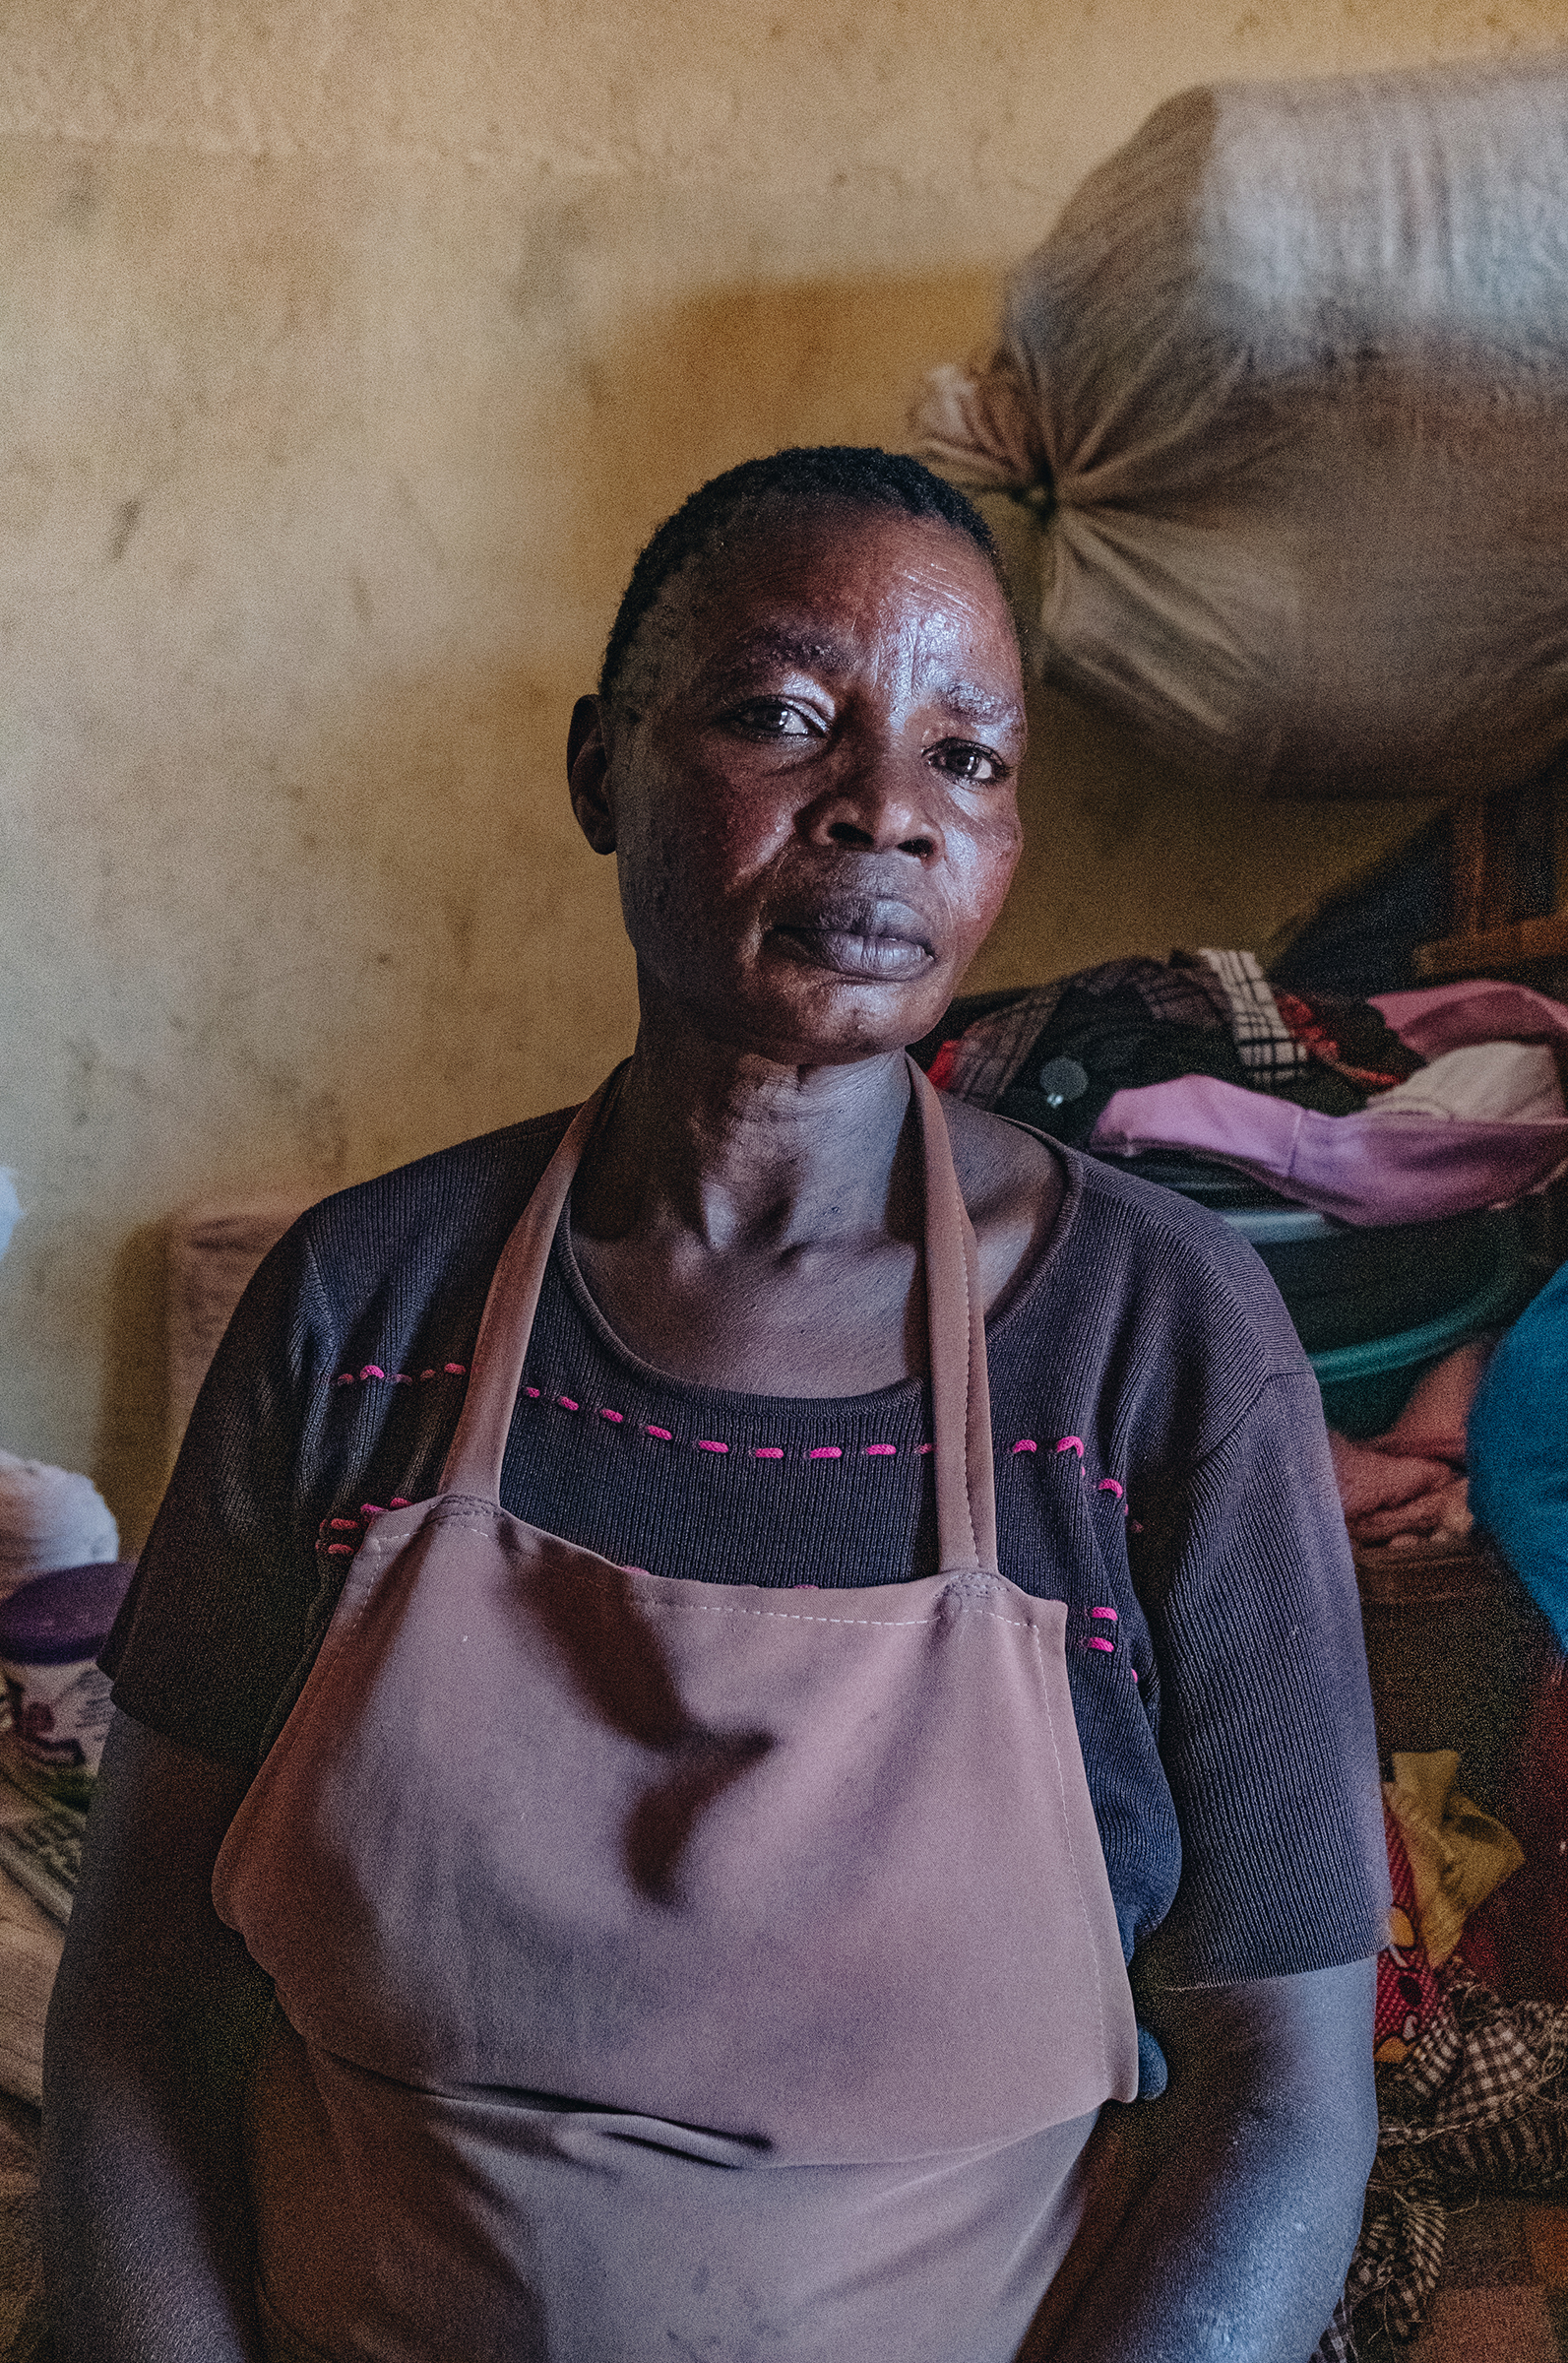 Evelyn Ajuang, 41, was forced to move when Lake Nakuru's rising waters flooded her home. (Khadija M. Farah for TIME)